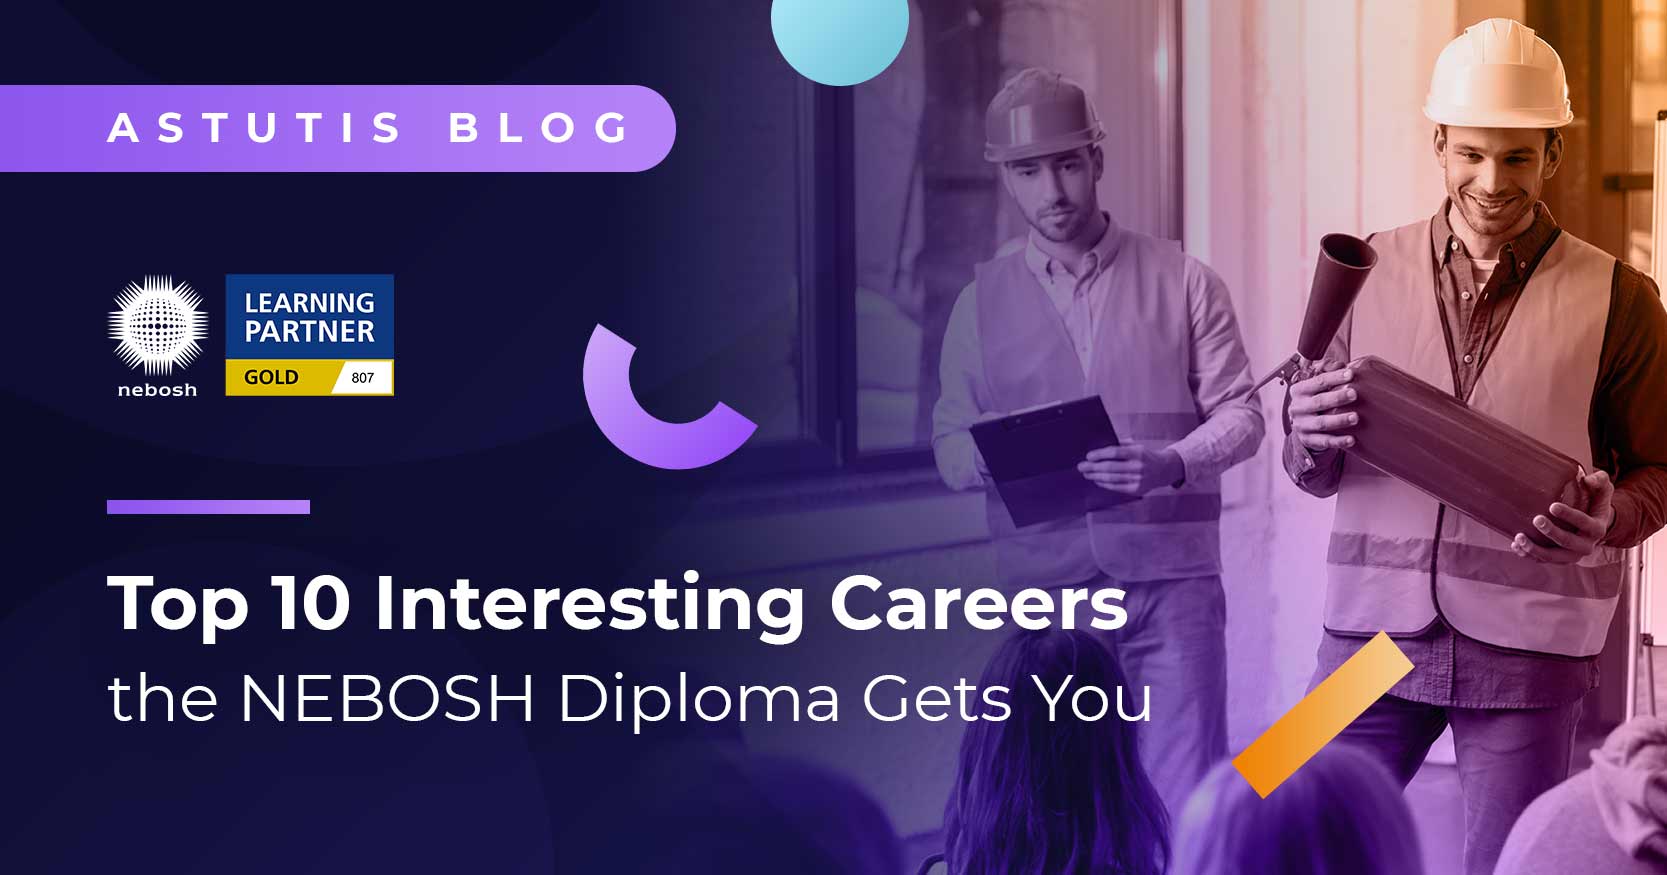 Top 10 Interesting Careers the NEBOSH Diploma Gets You Image